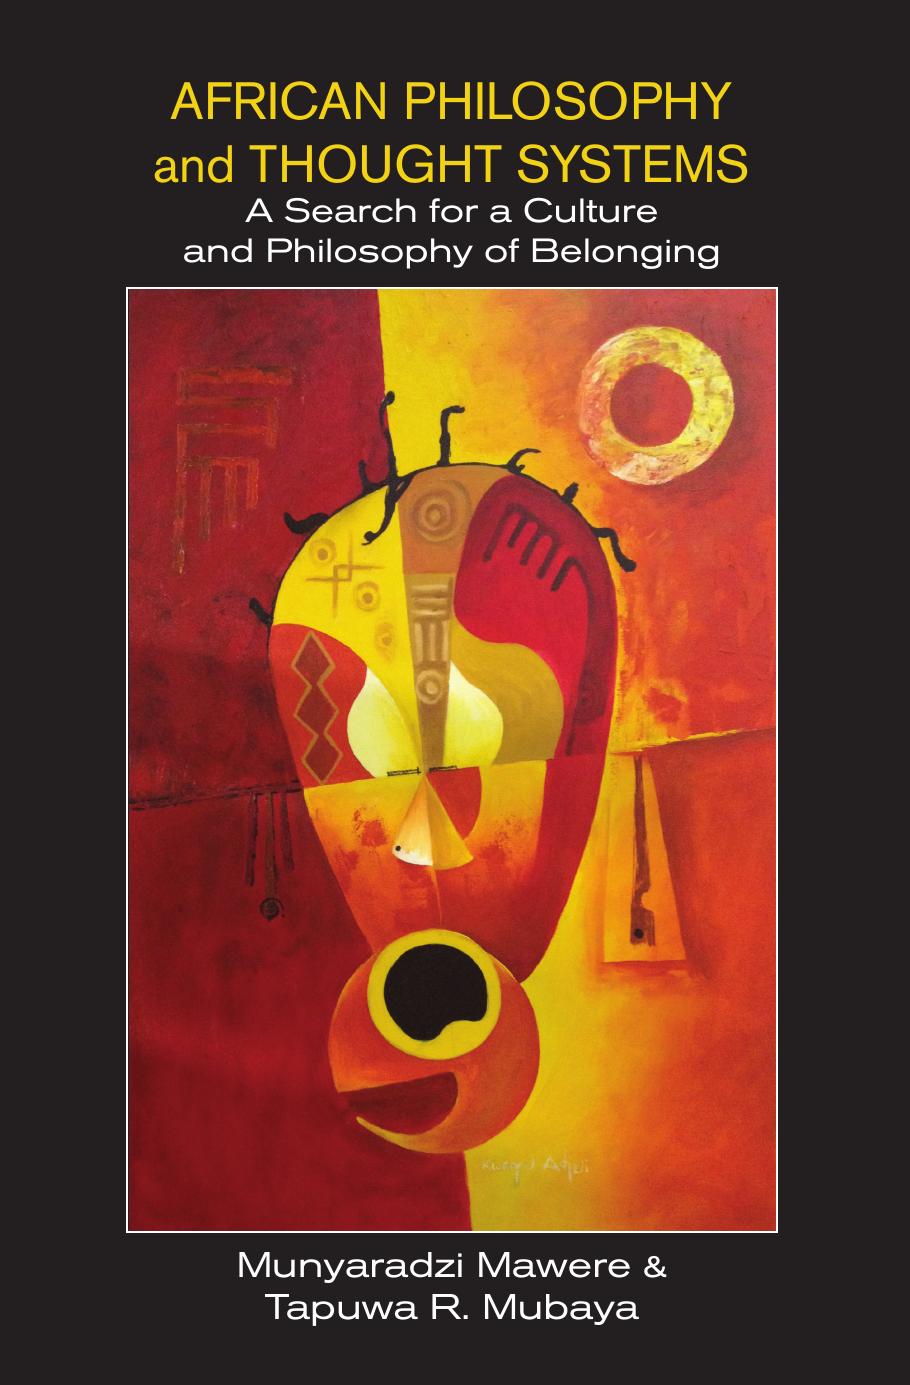 African Philosophy and Thought Systems: A Search for a Culture and Philosophy of Belonging